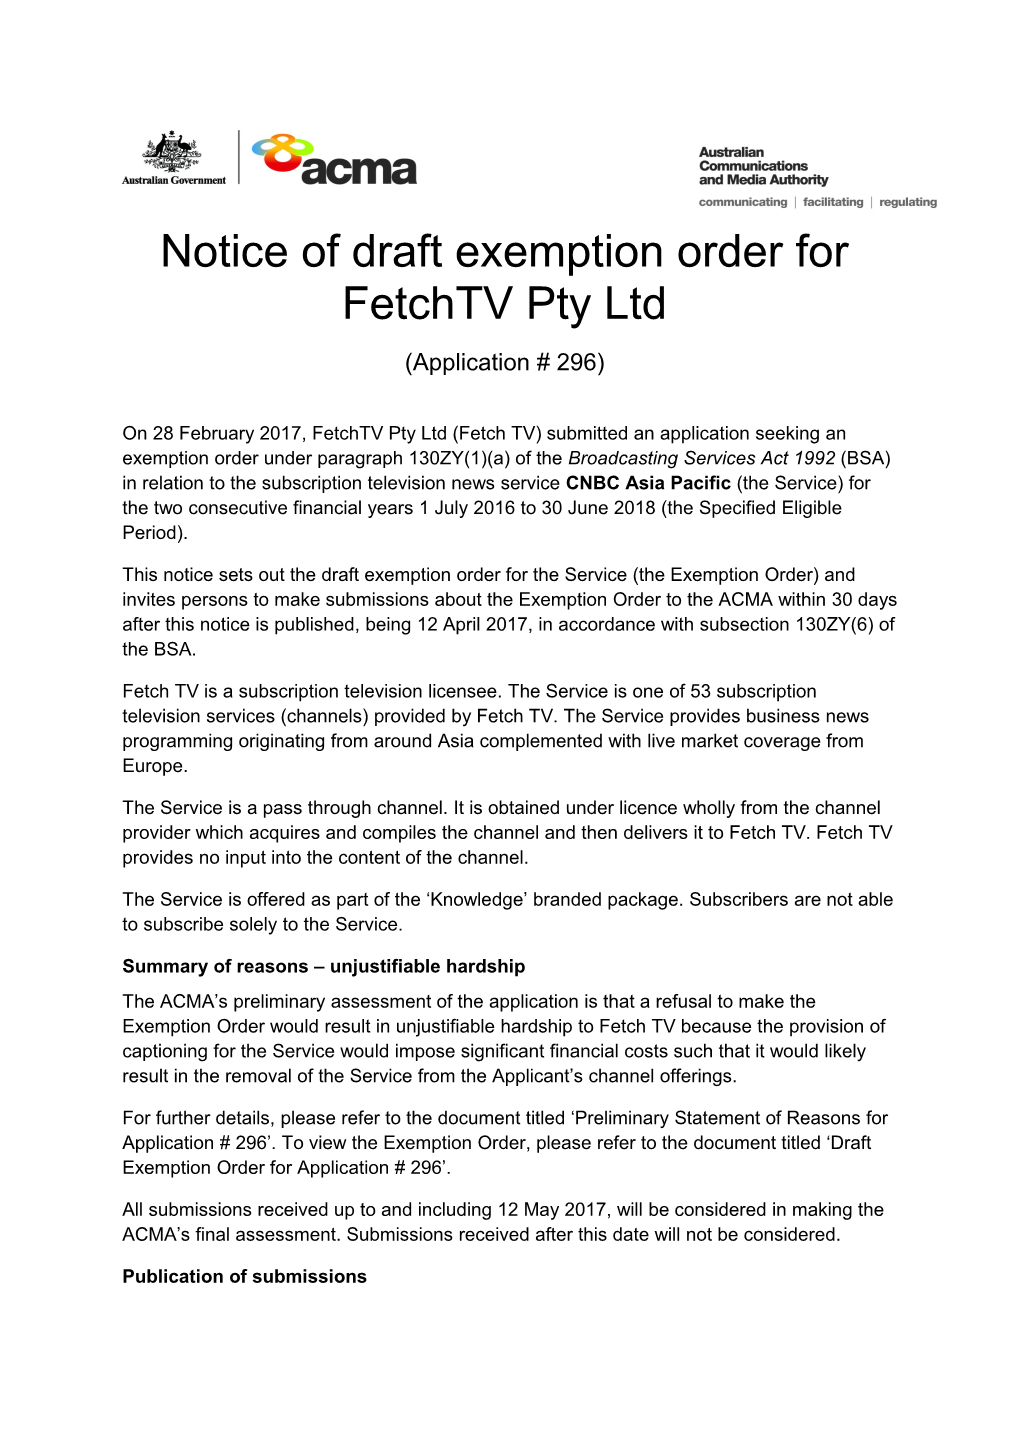 Notice of Draft Exemption Order for Fetchtv Pty Ltd